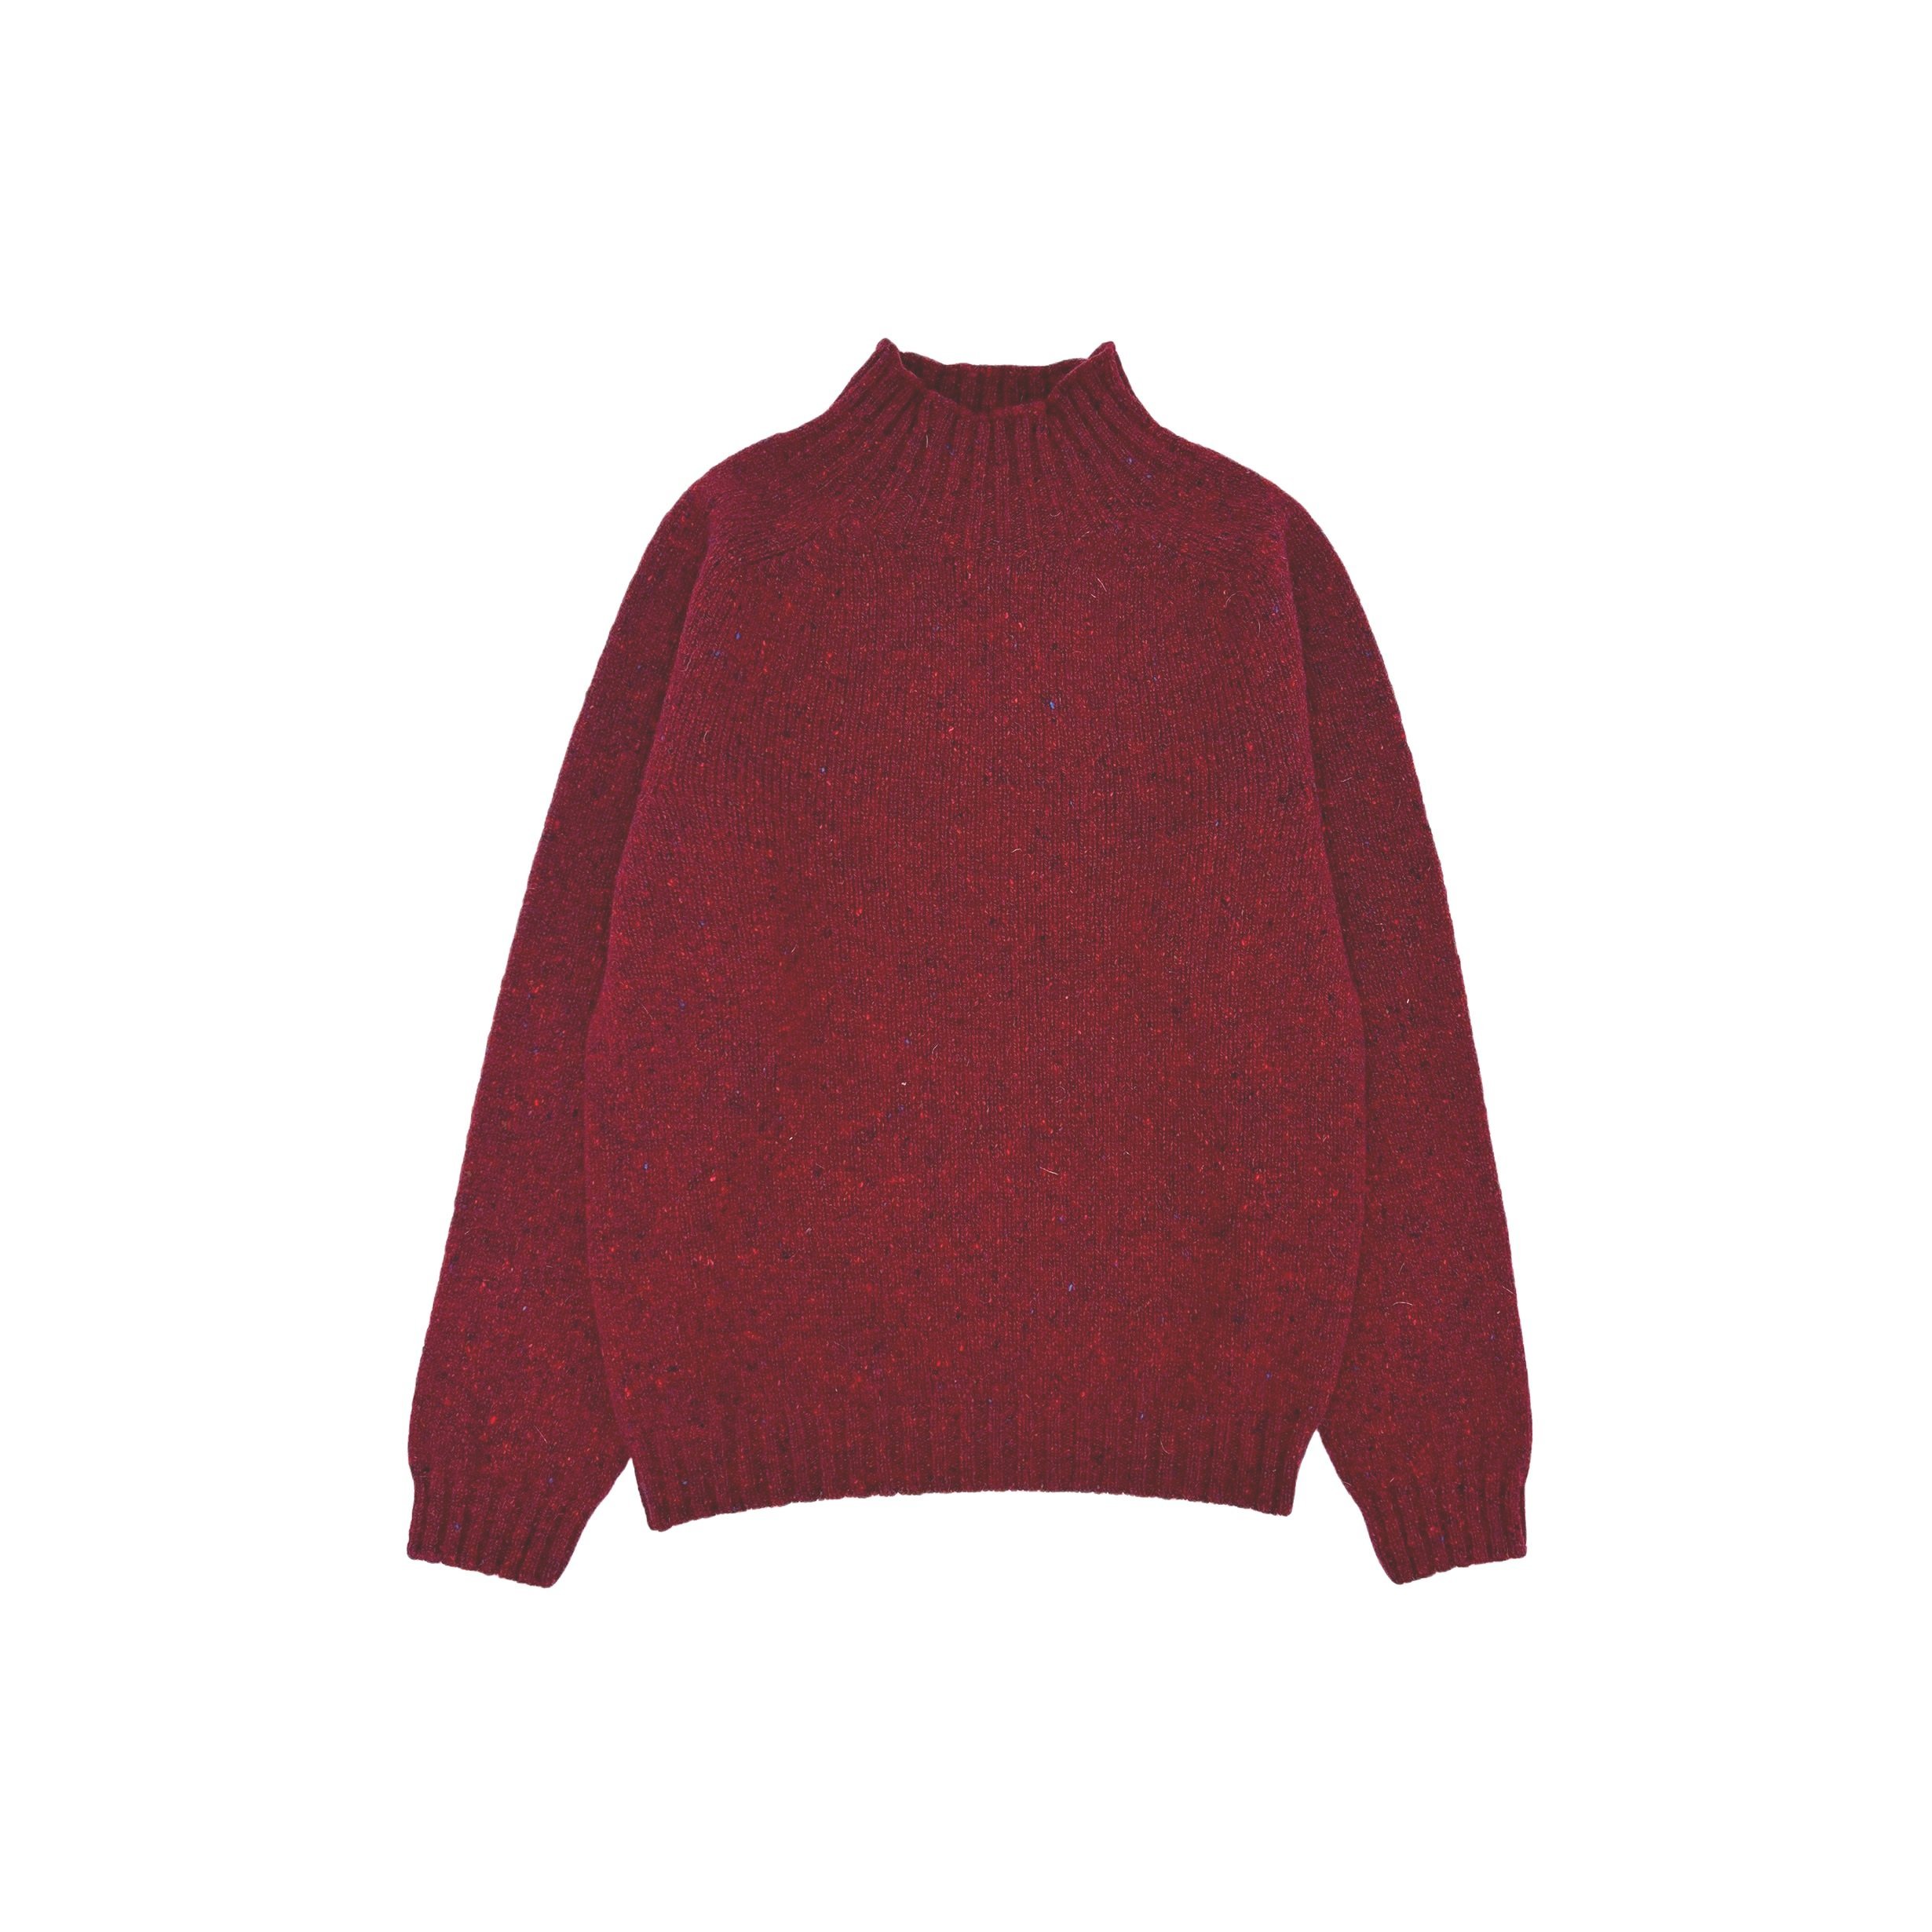 An image of Funnel Neck Glenugie Nep Womens Jumper - 4 Colours - Medium/Tiree Red